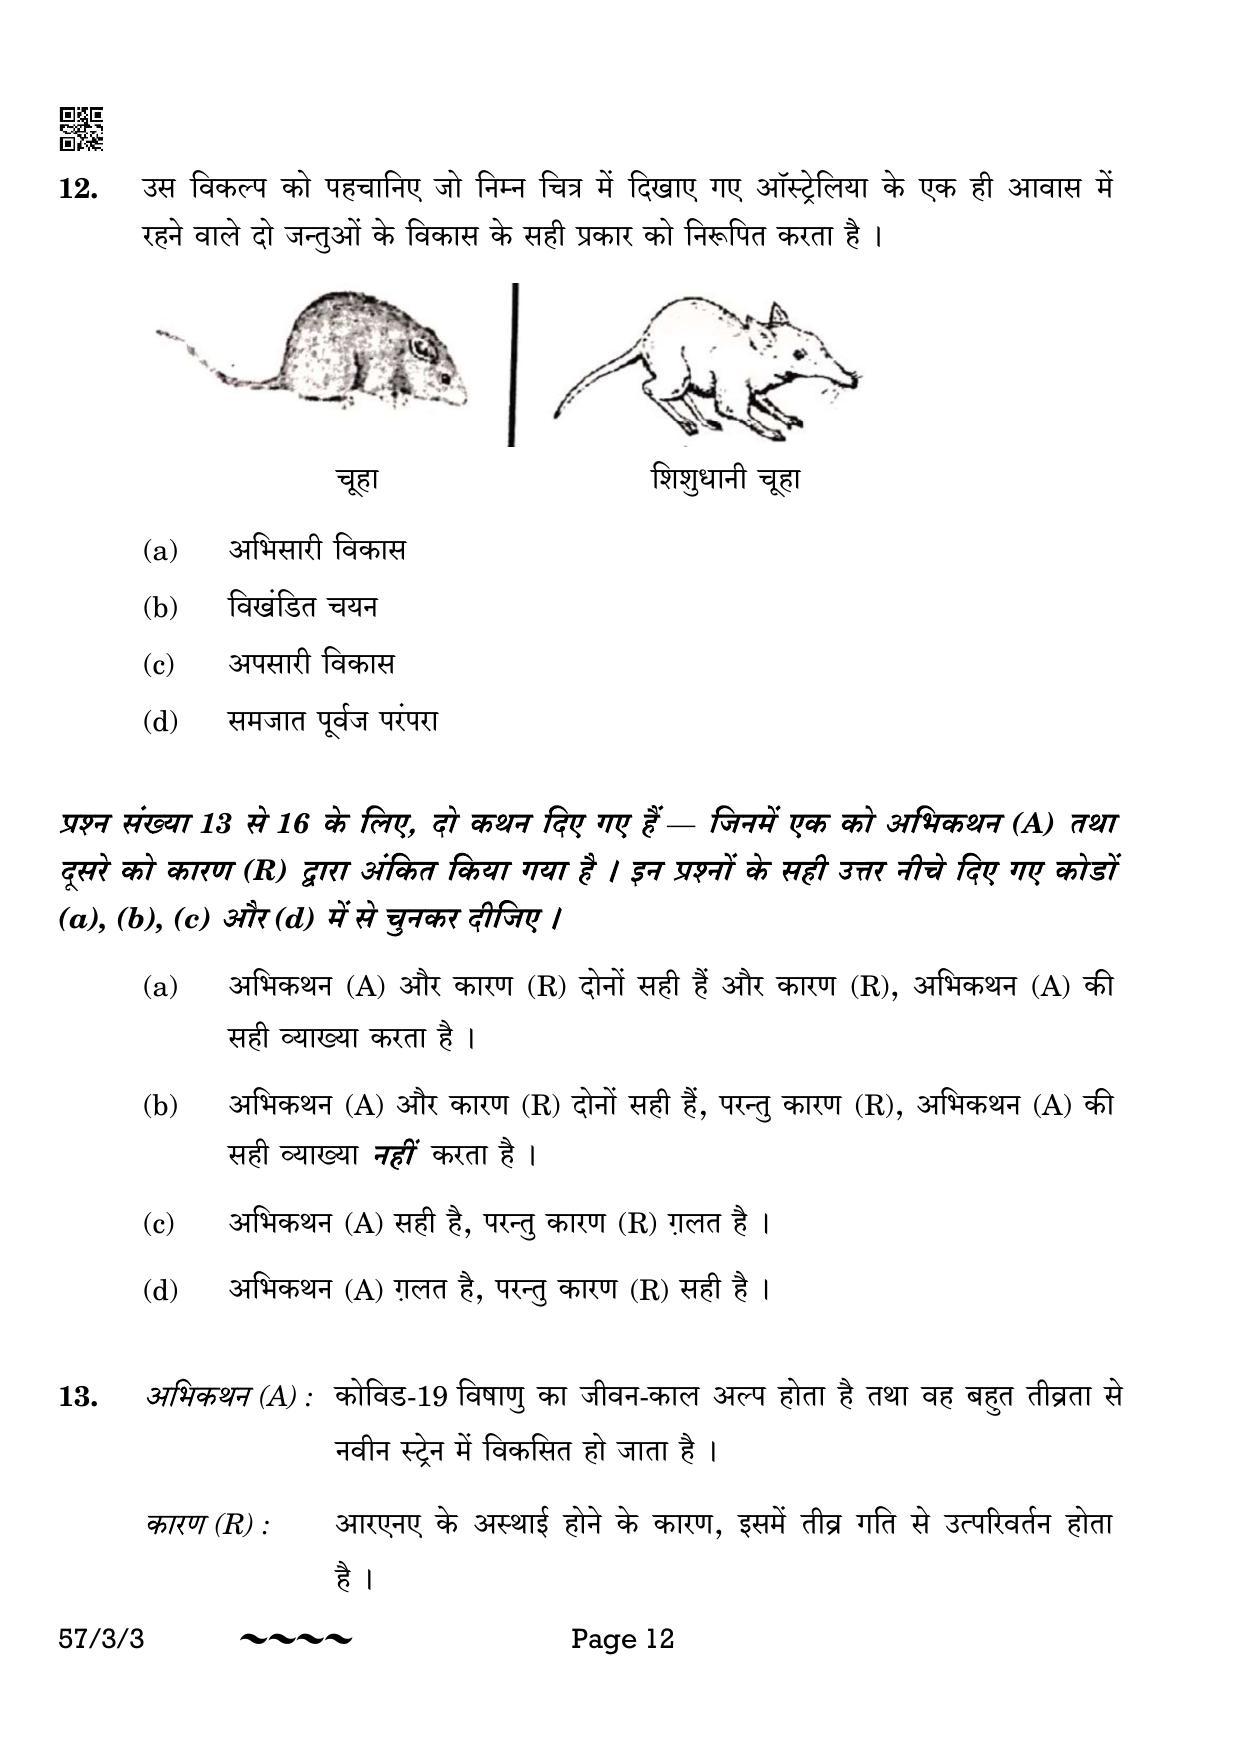 CBSE Class 12 57-3-3 Biology 2023 Question Paper - Page 12